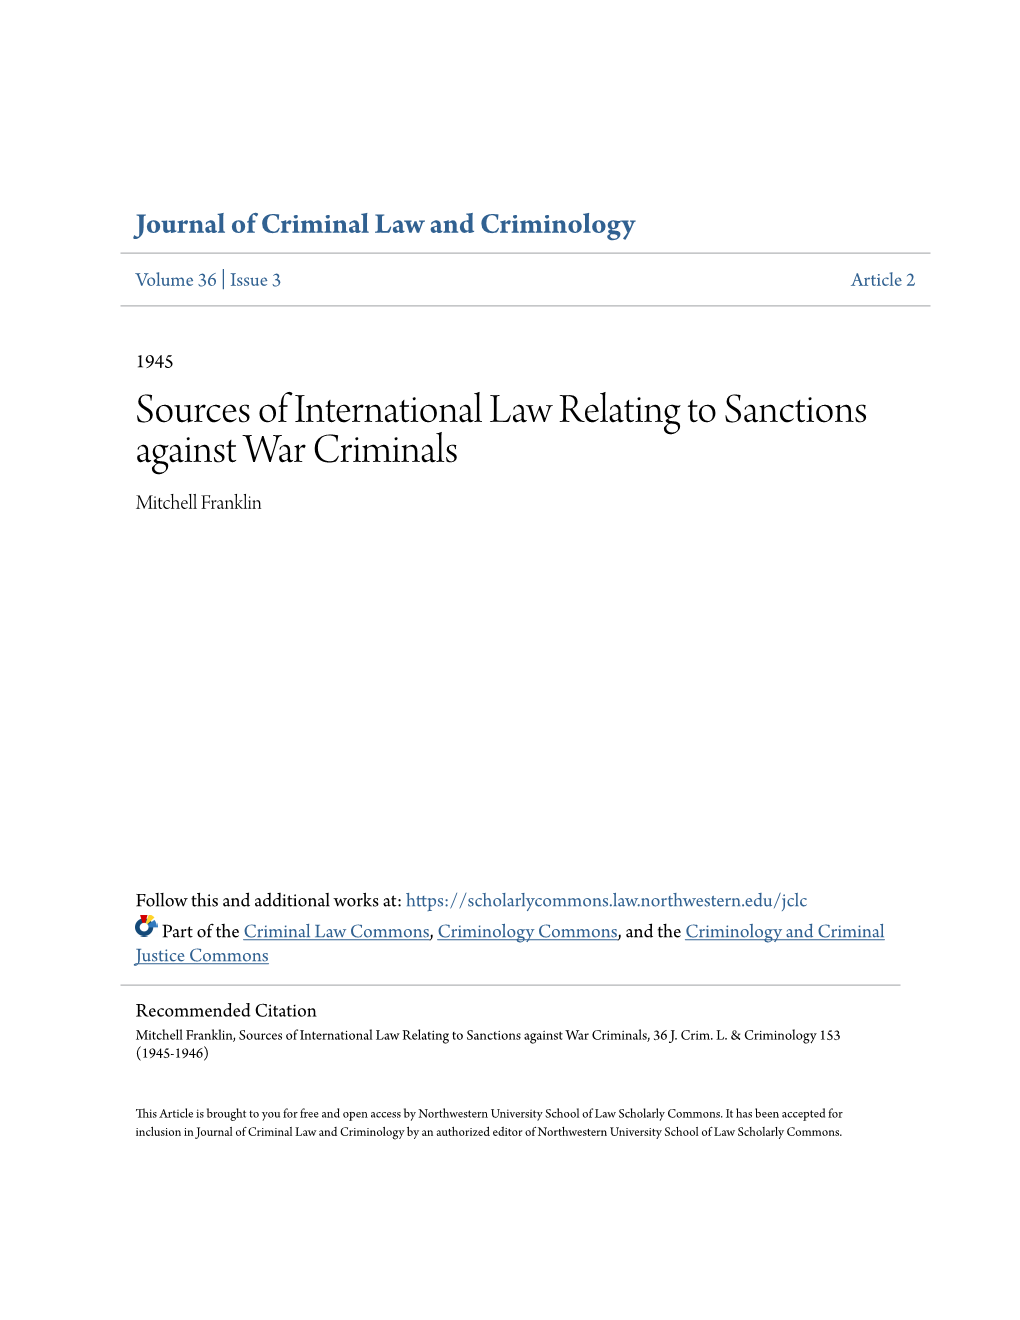 Sources of International Law Relating to Sanctions Against War Criminals Mitchell Franklin